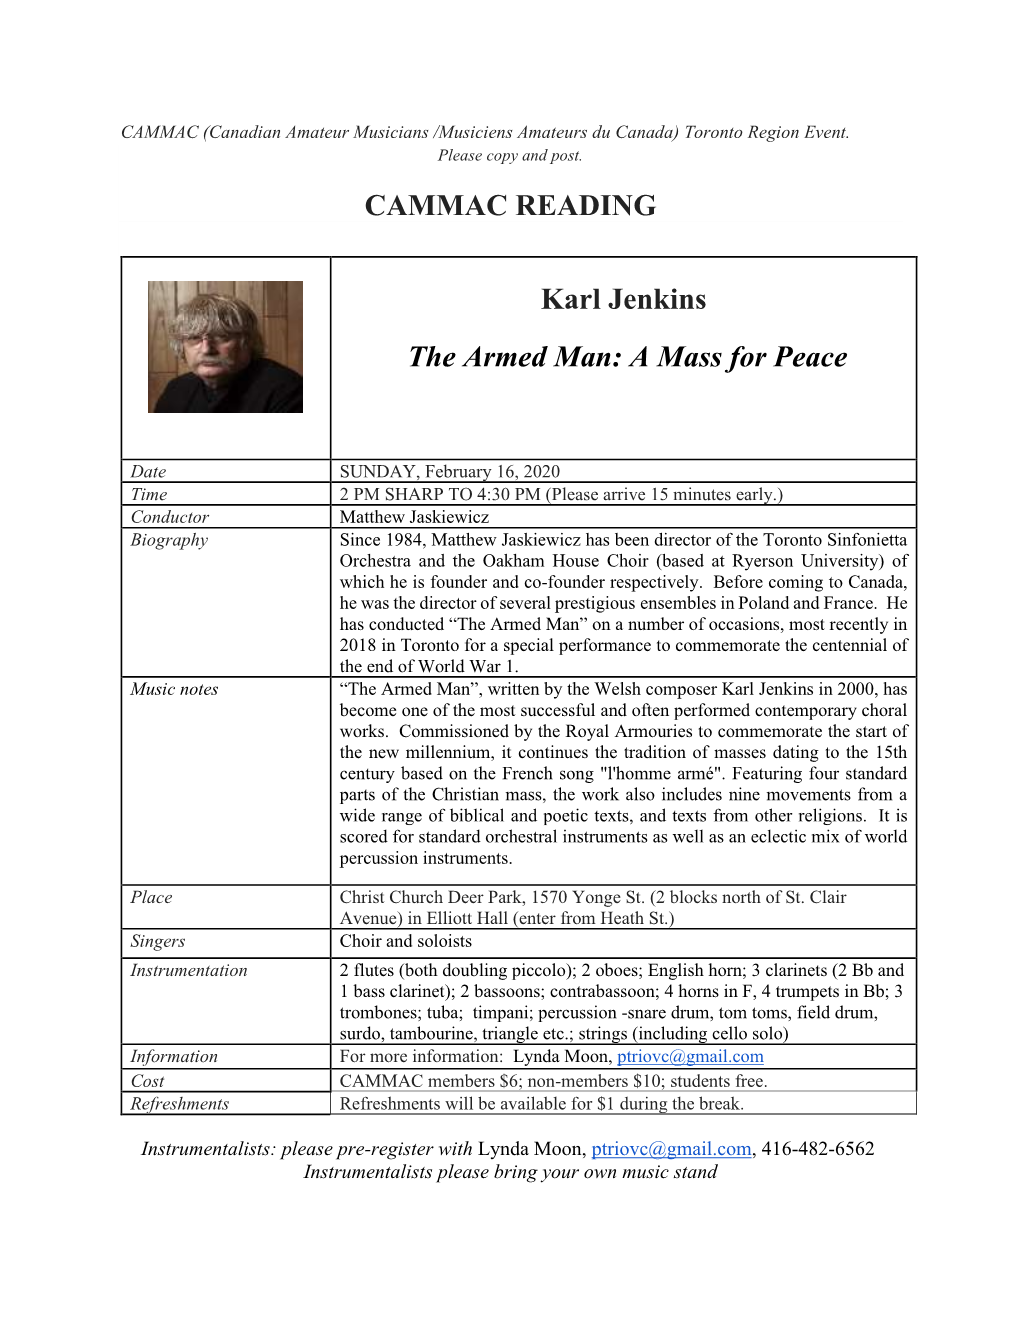 CAMMAC READING Karl Jenkins the Armed Man: a Mass for Peace